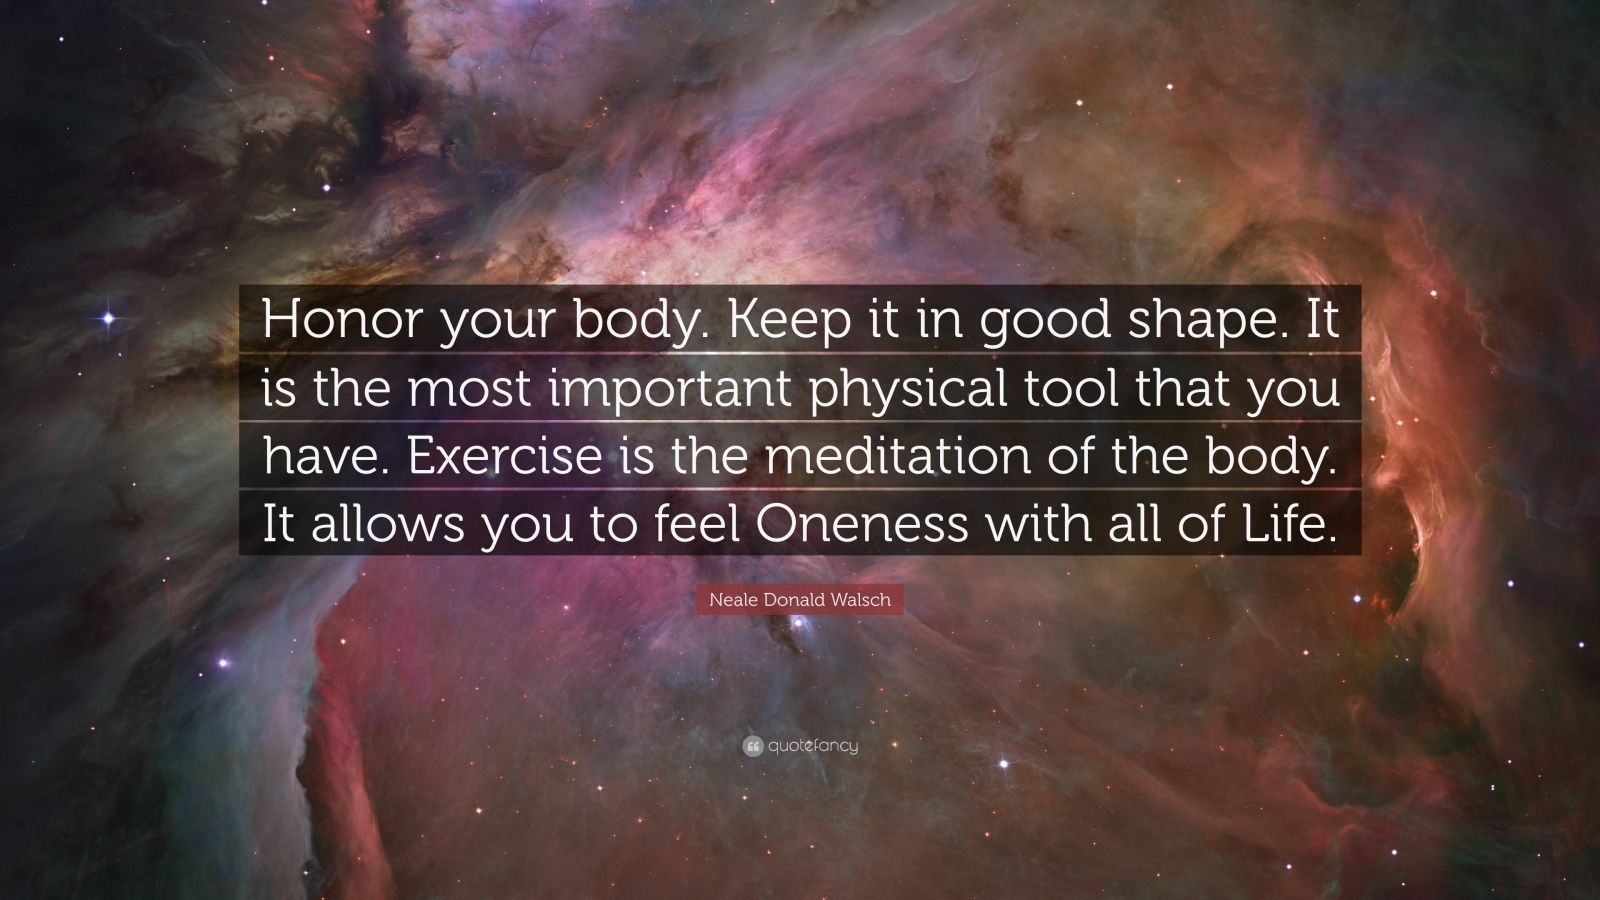 Neale Donald Walsch Quote “Honor your body Keep it in good shape